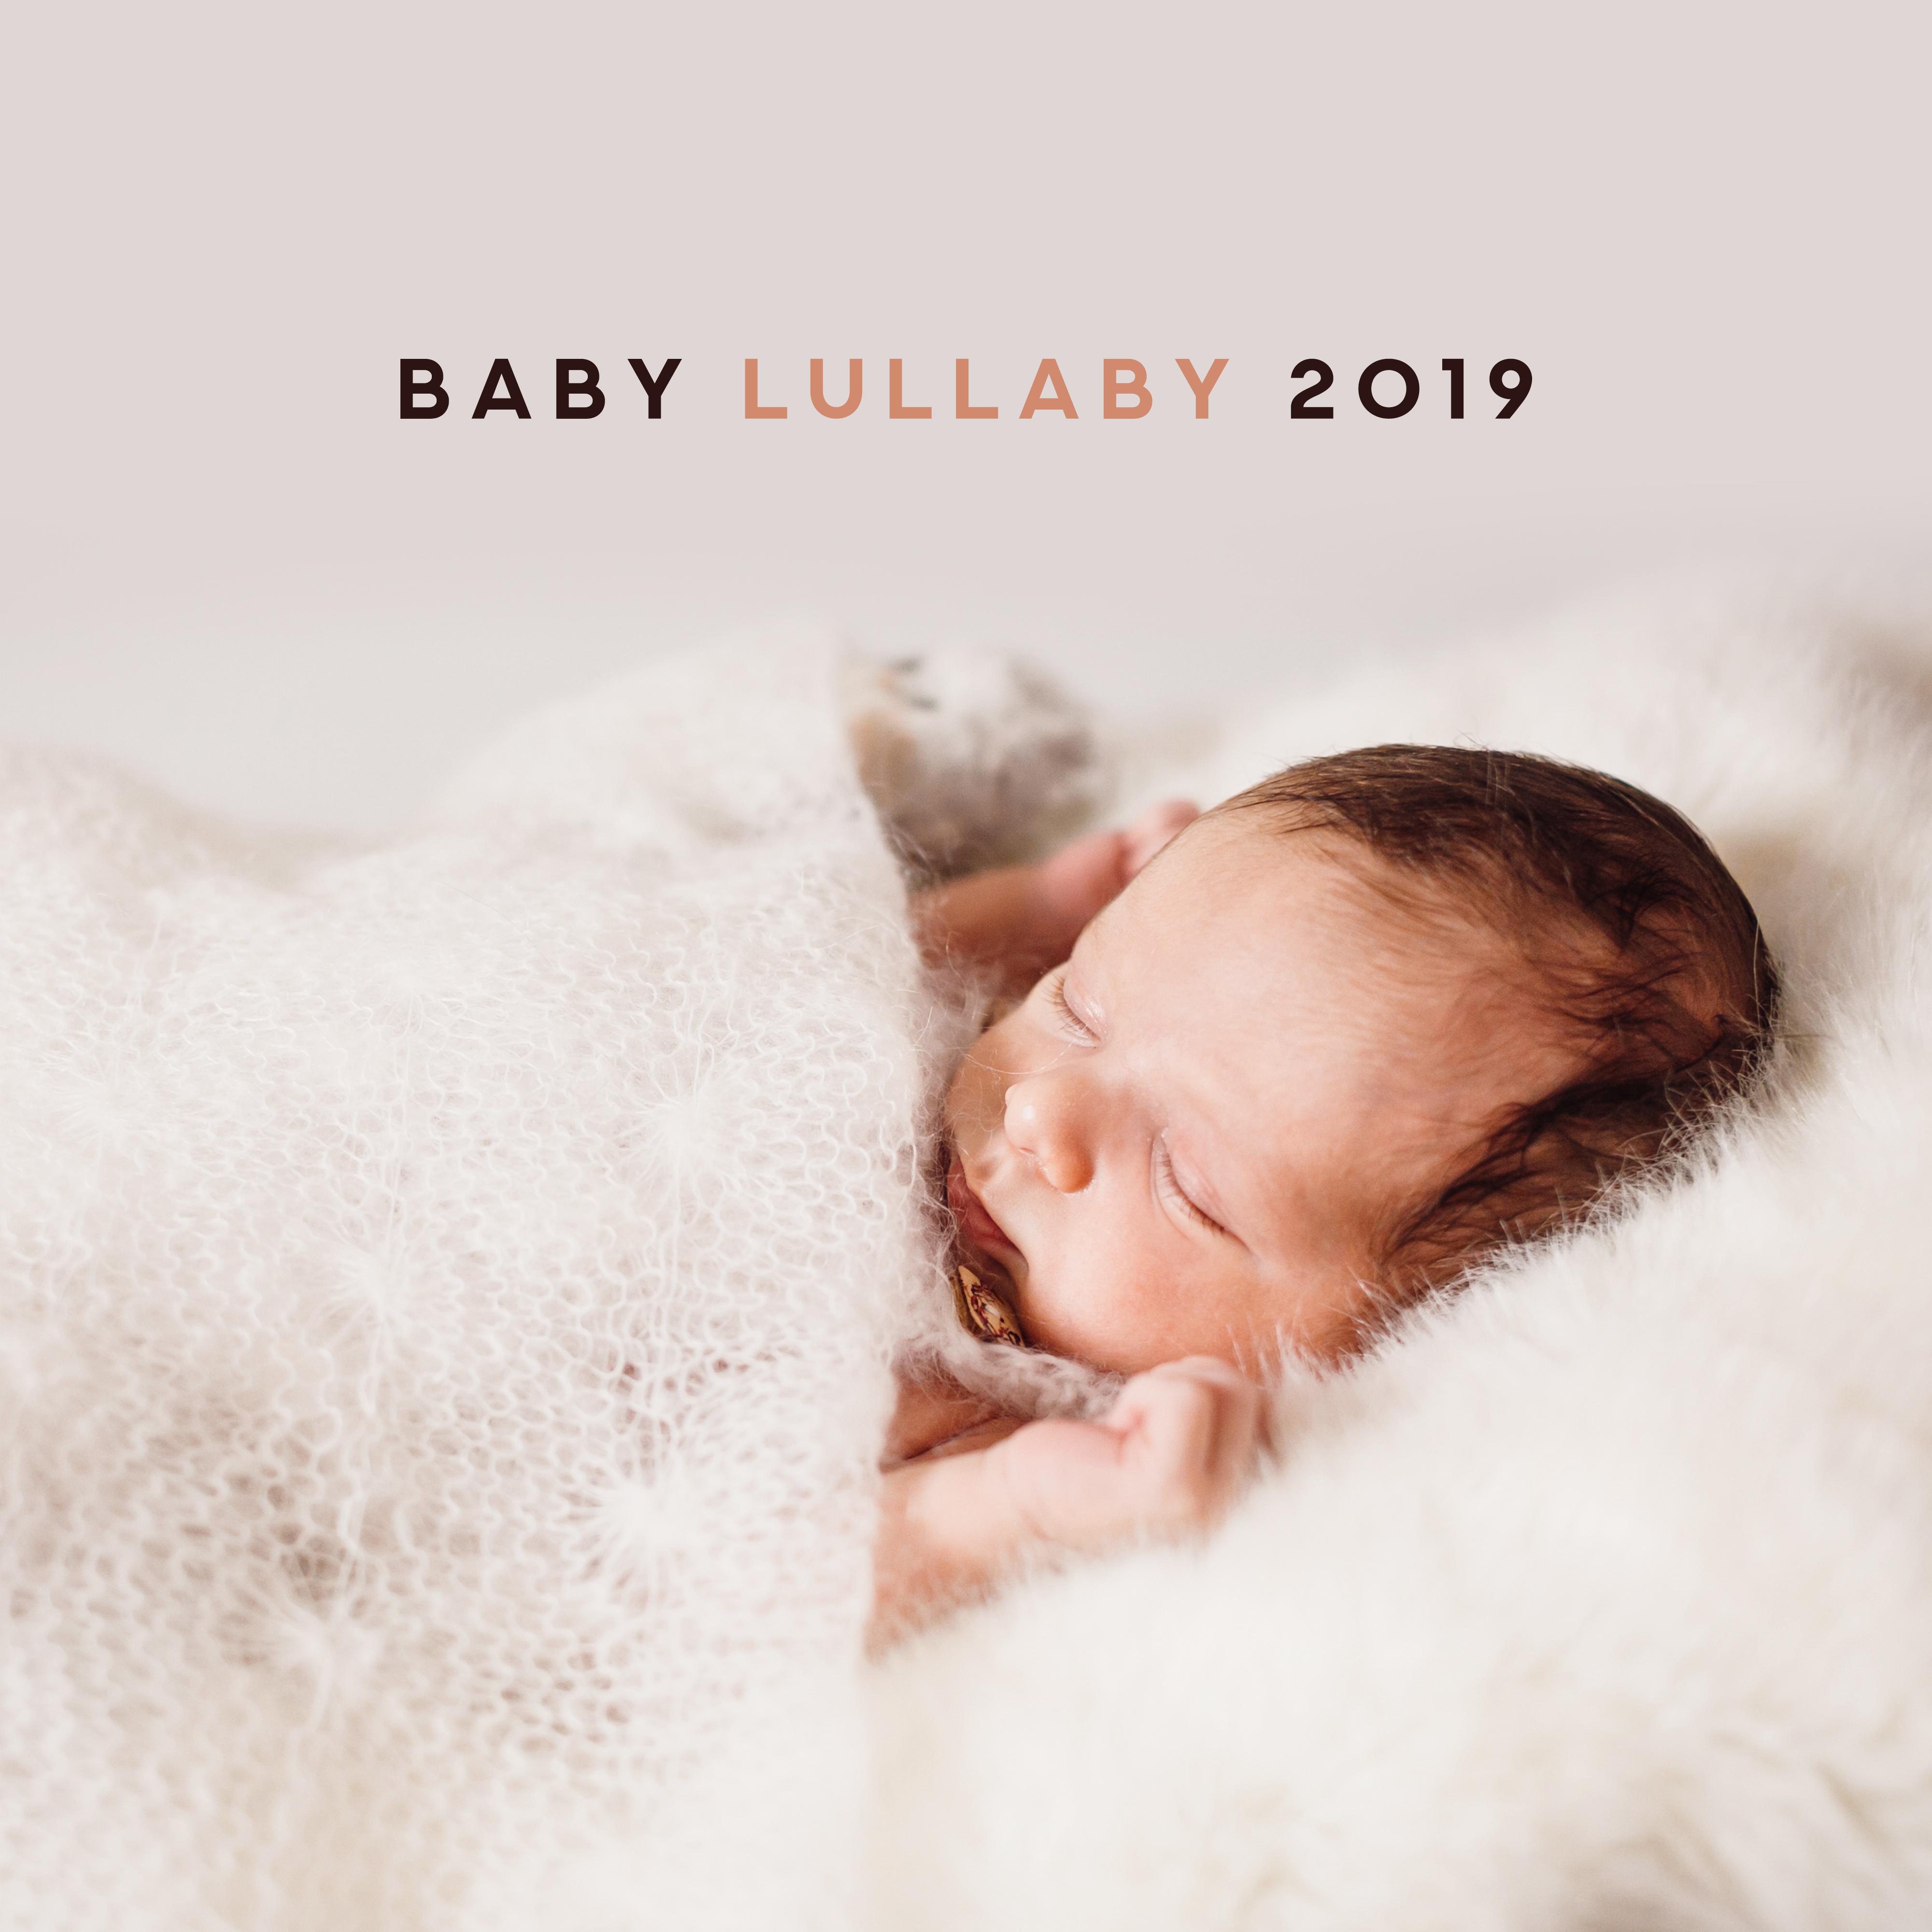 Baby Lullaby 2019 – Relaxing Music for Baby, Sleep Songs for Kids, Baby Music at Night, Soothing Sounds to Calm Down